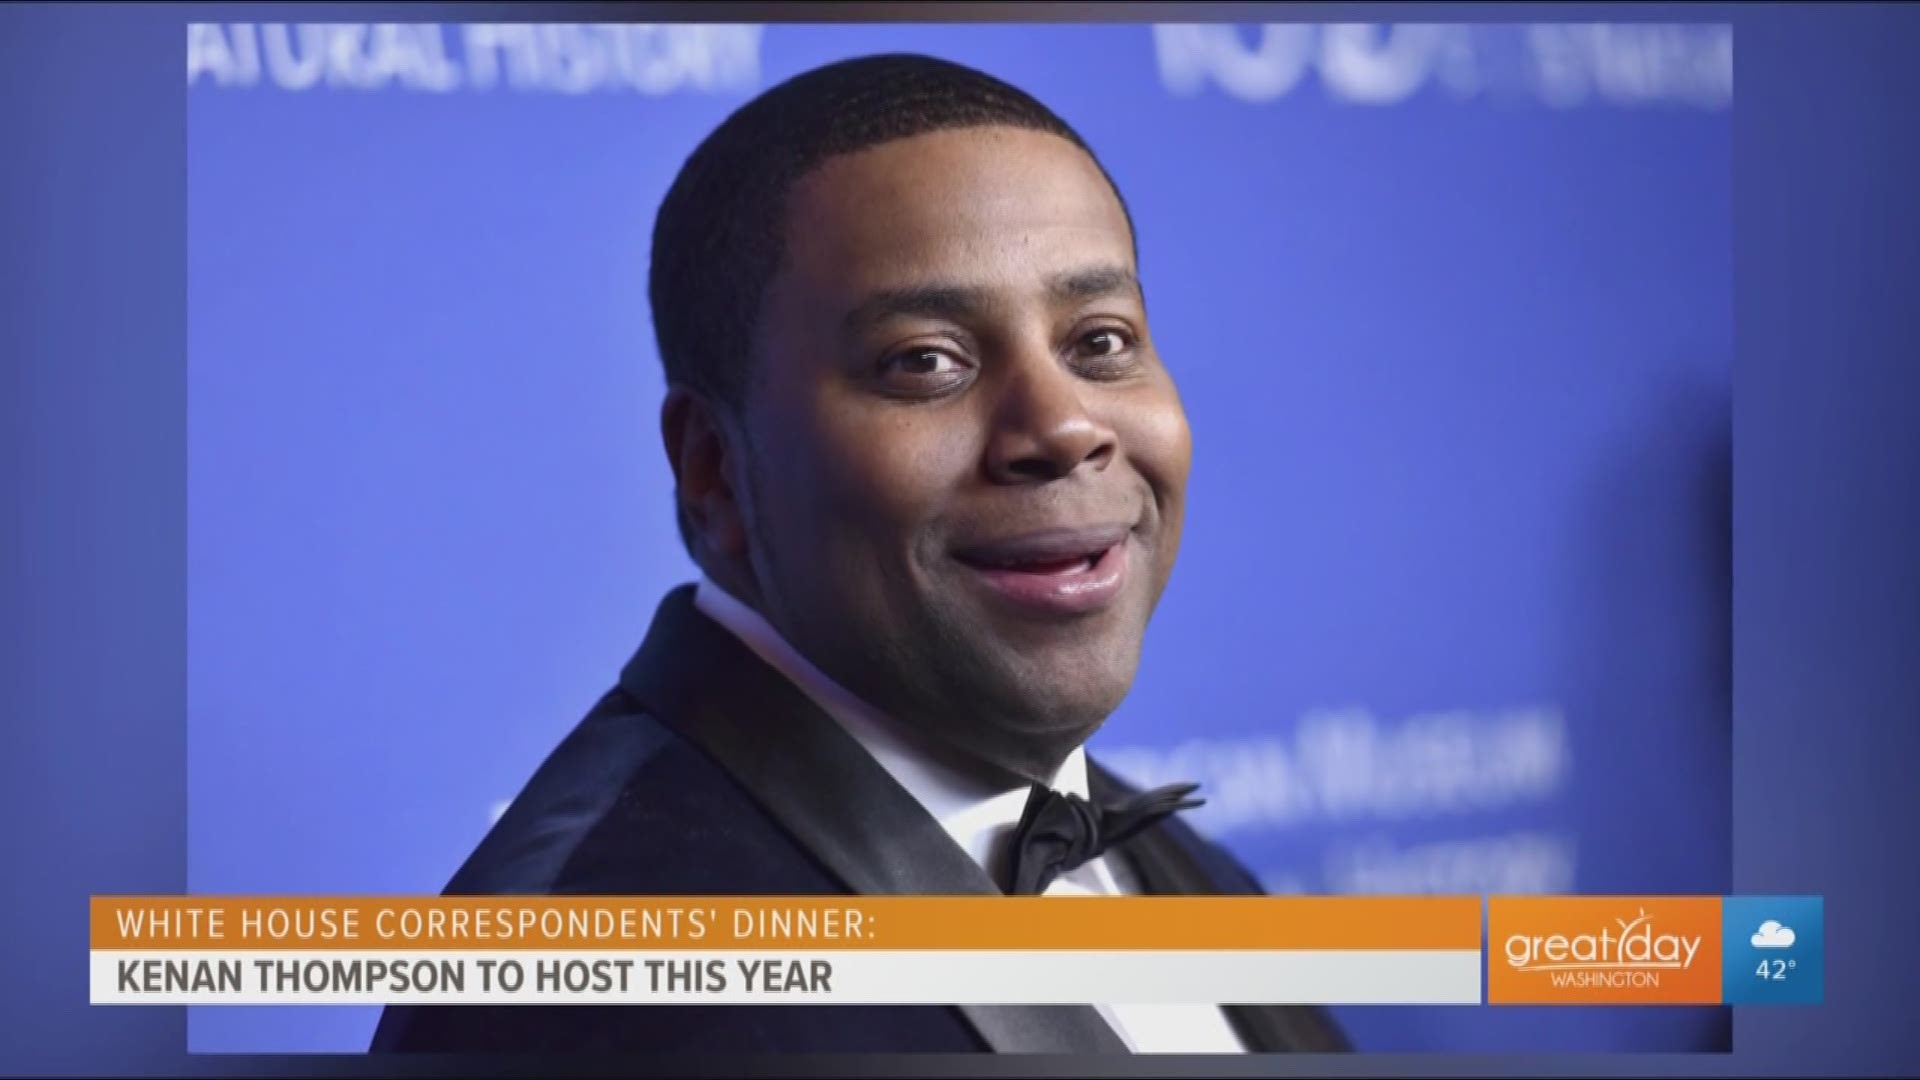 For our morning mix series, we give you the rundown on the latest news. Today the ladies talk about Kenan Thompson hosting The White House Correspondents Dinner.